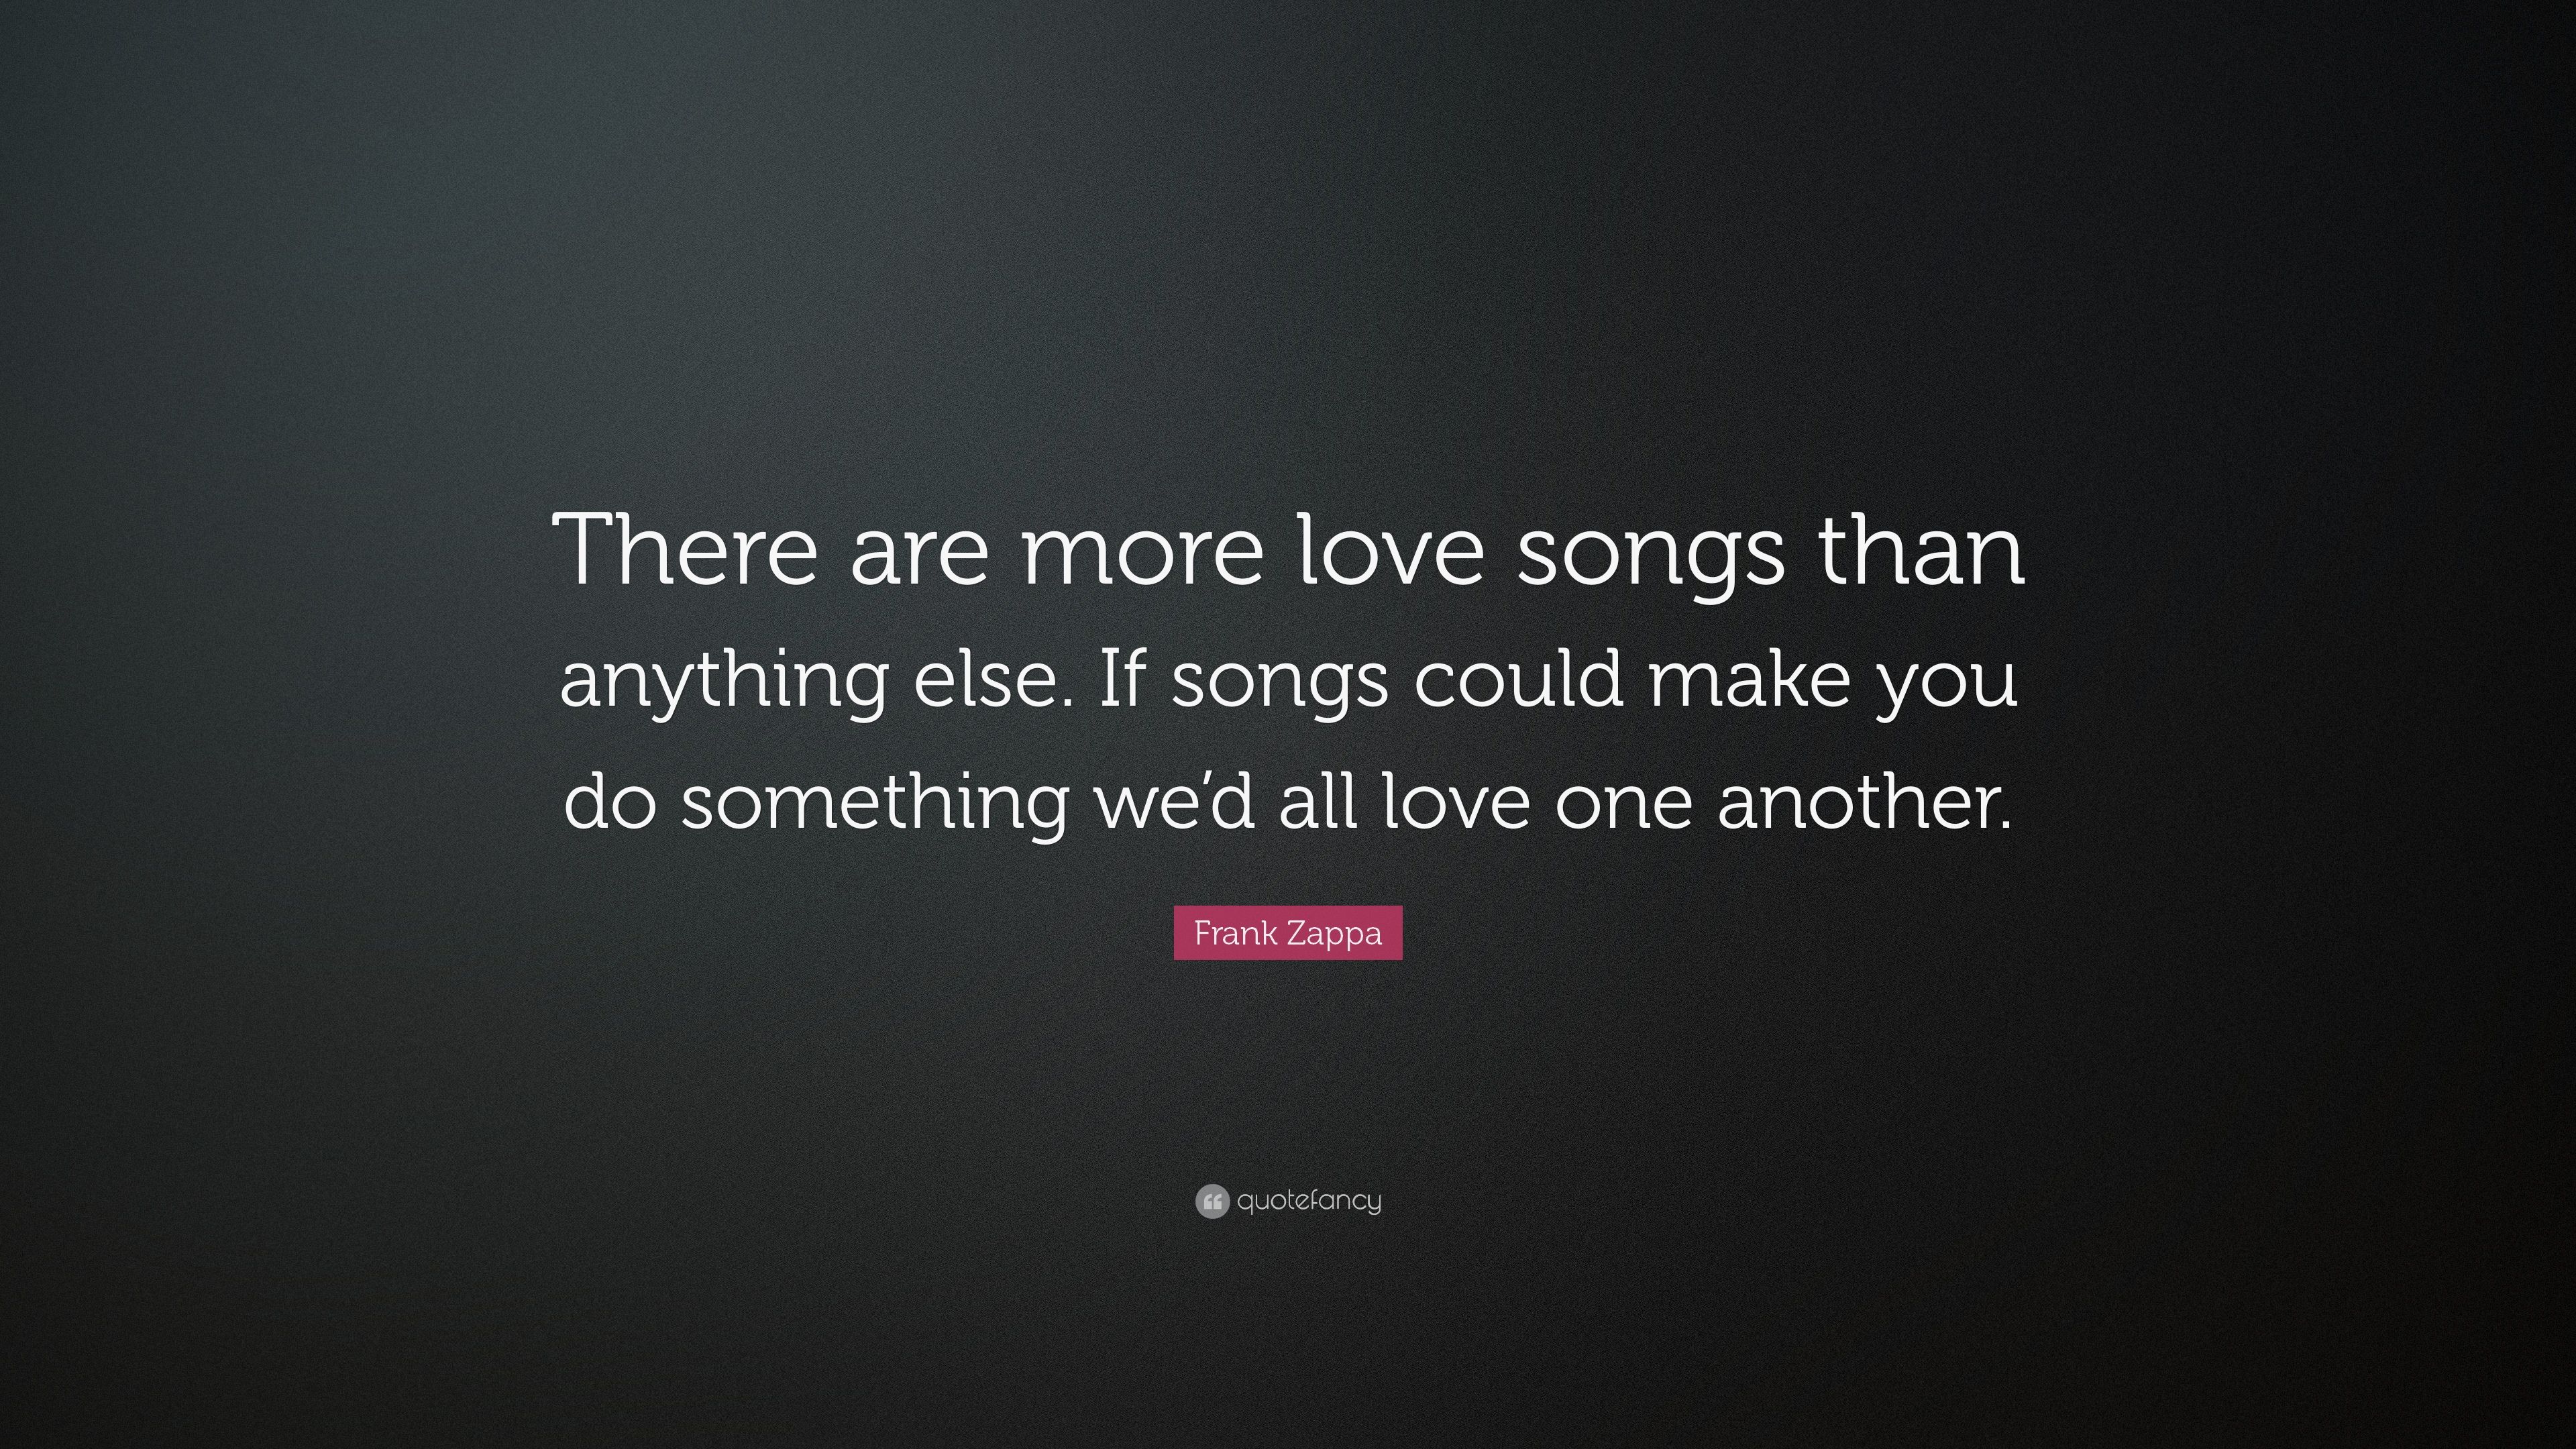 Frank Zappa Quote: “There are more love songs than anything else